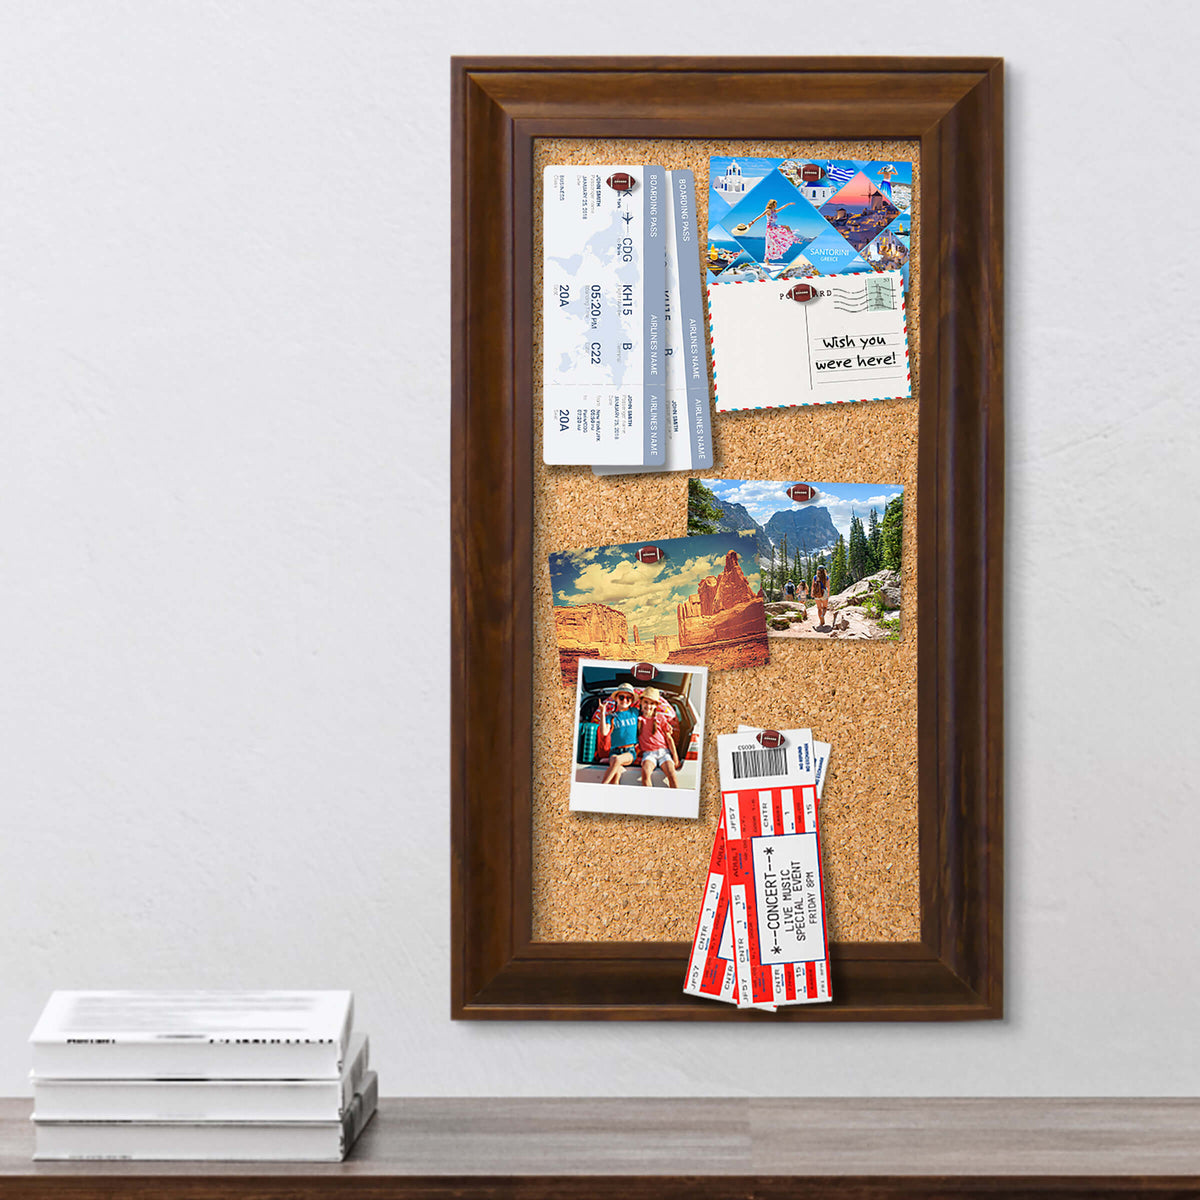 Use Your Football Shaped Push Pins on a Cork Memo Board